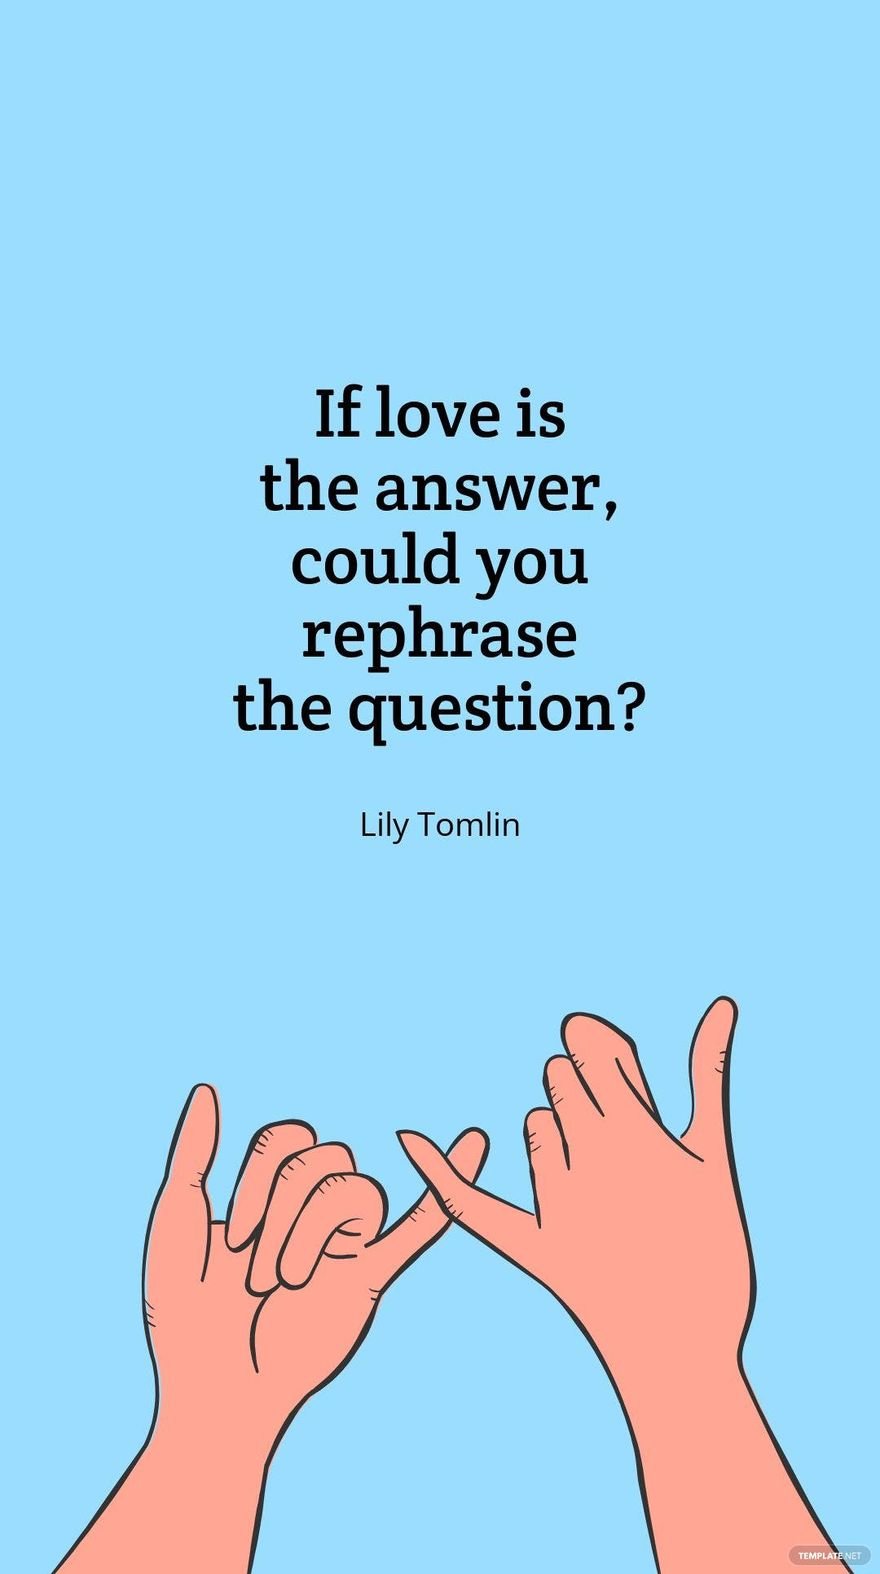 Lily Tomlin - “If love is the answer, could you rephrase the question?”